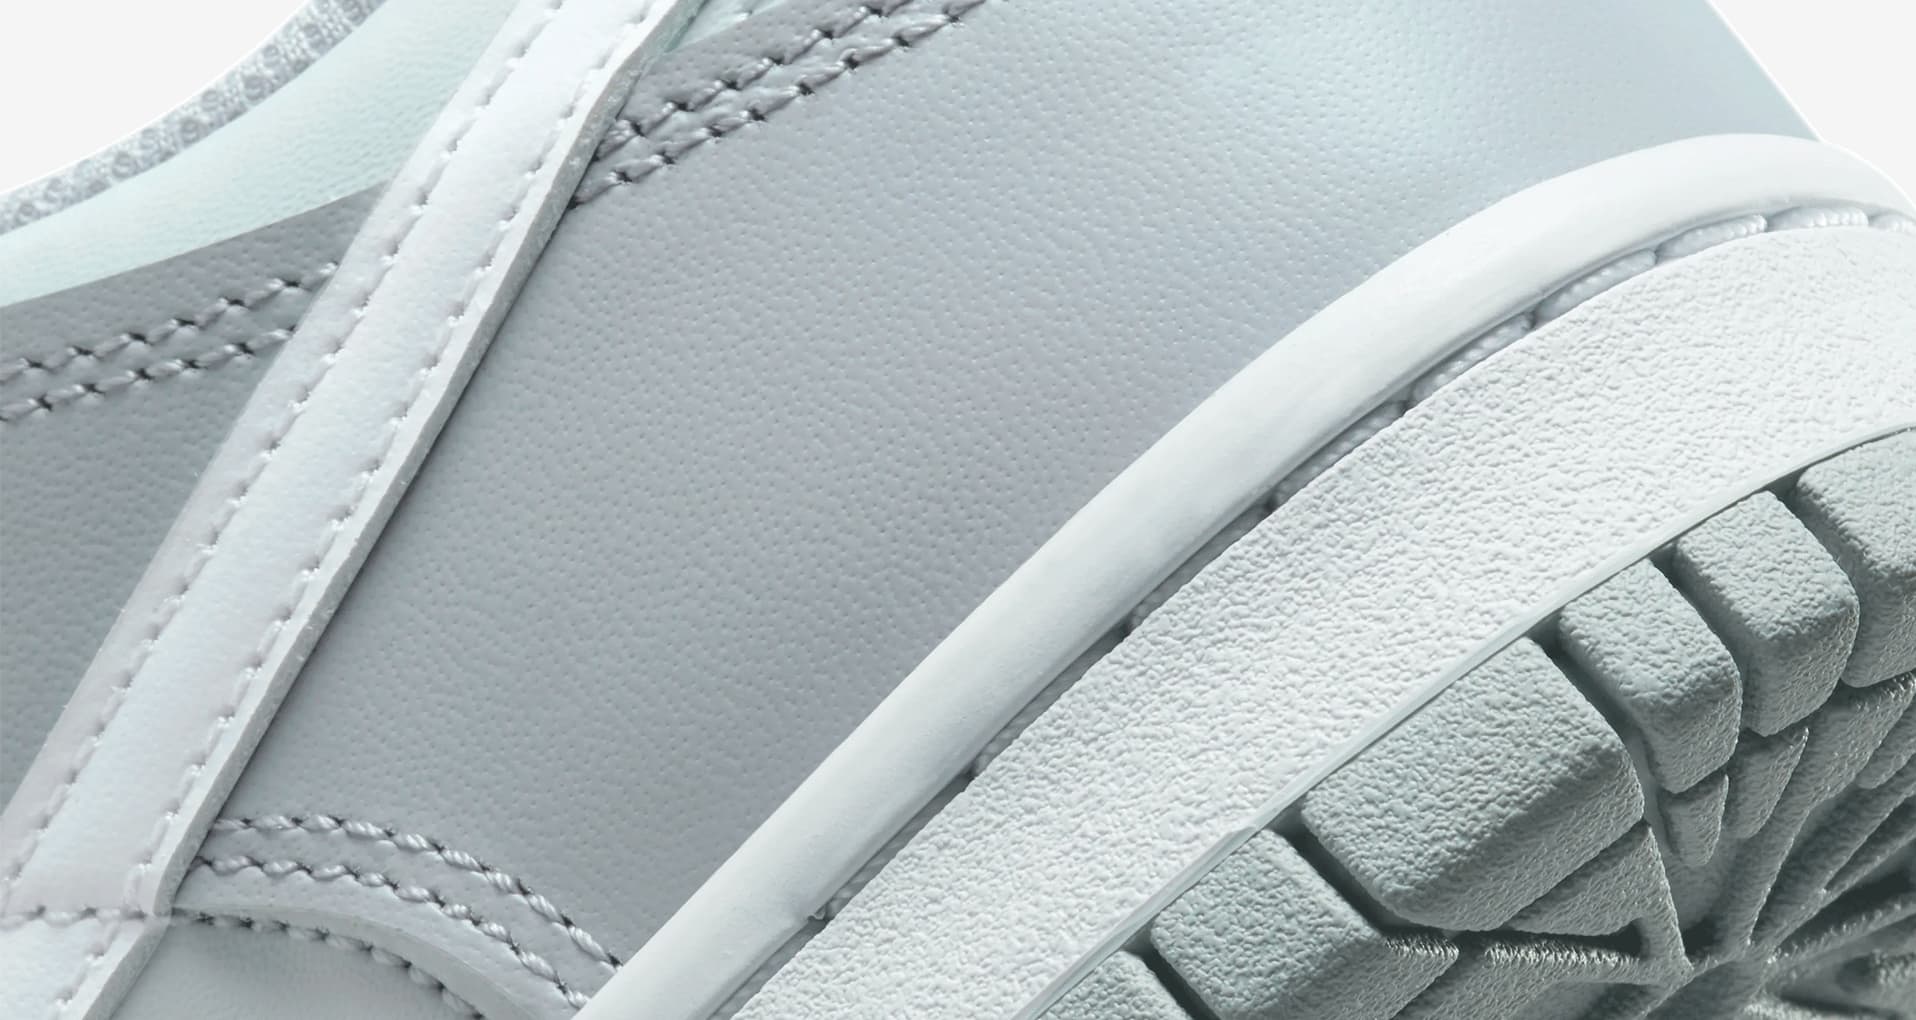 Big Kids' Dunk Low 'Pure Platinum' (DH9765-001) Release Date. Nike SNKRS IN